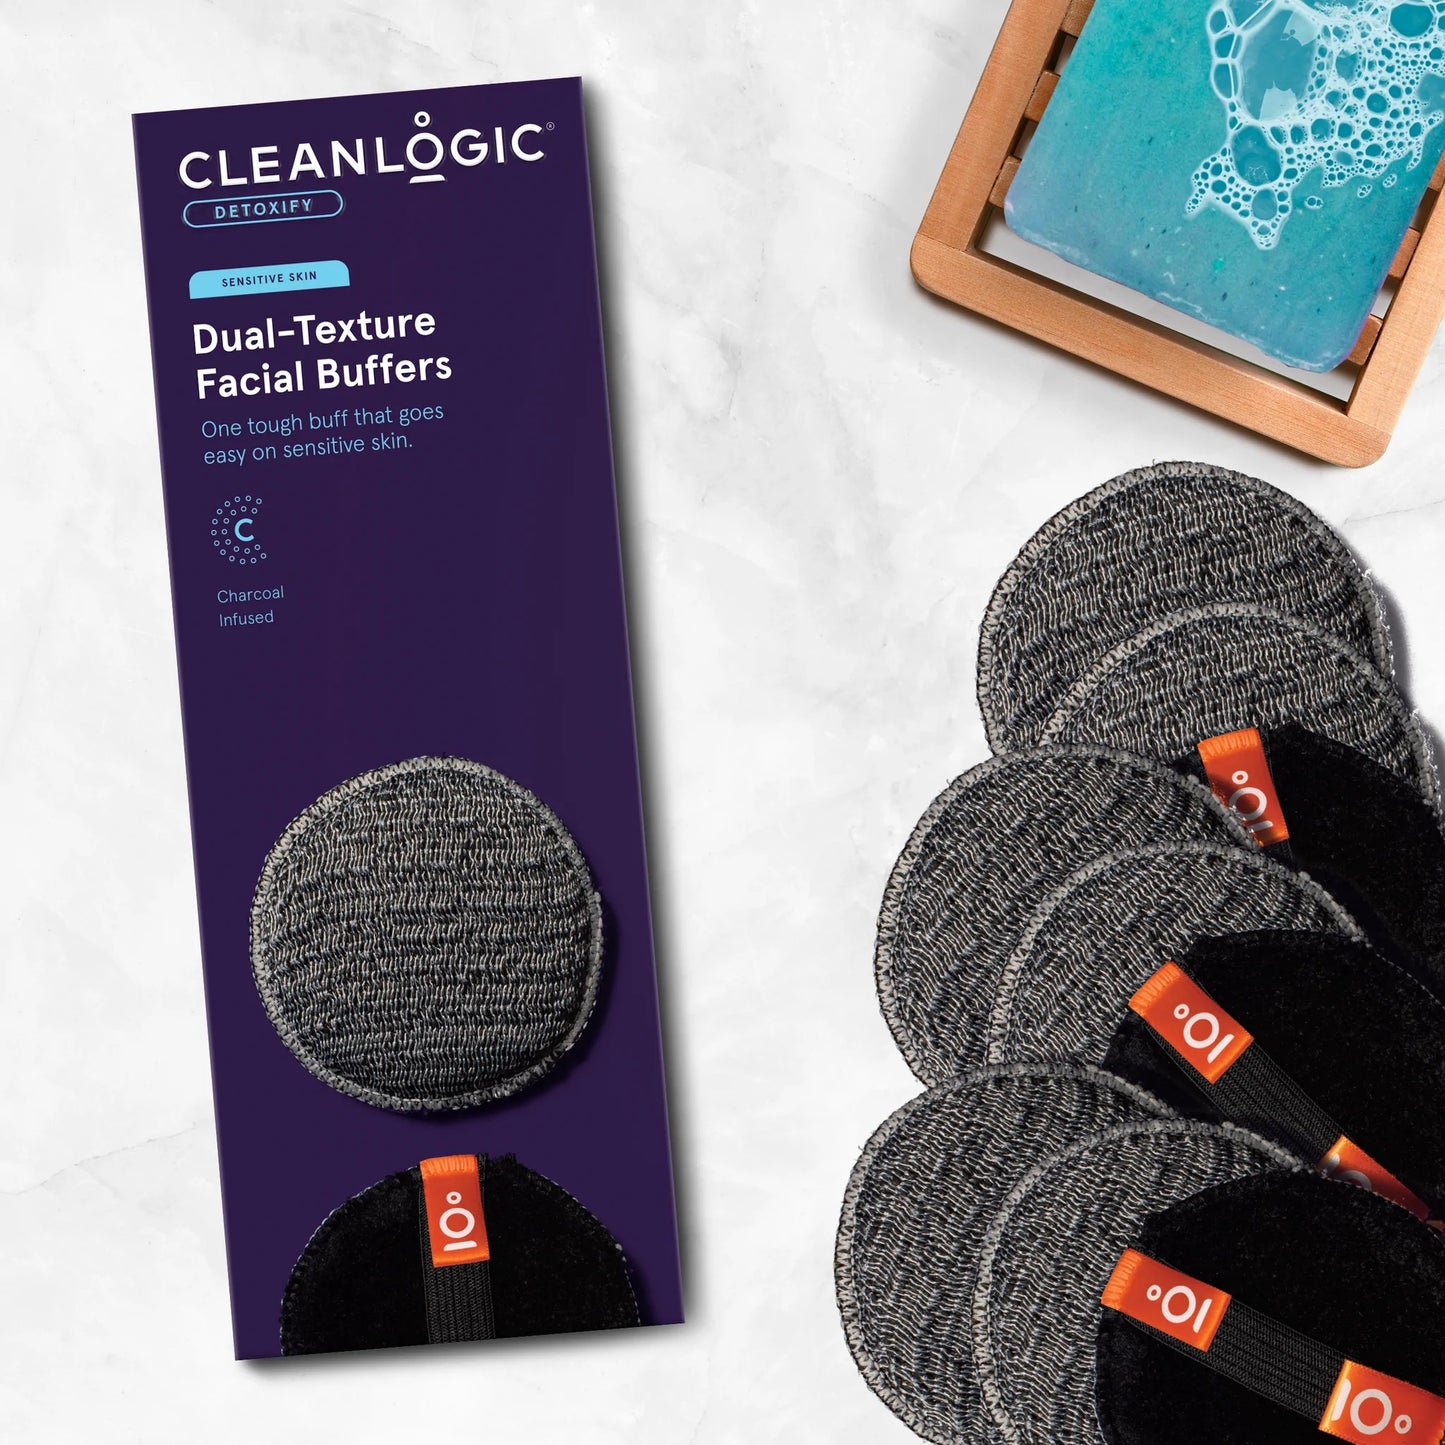 Dual texture Charcoal Facial Buffers are infused with charcoal to draw out impurities in your skin. The textured side exfoliates and cleanses, and the soft microfiber side removes dirt, oil, and makeup.